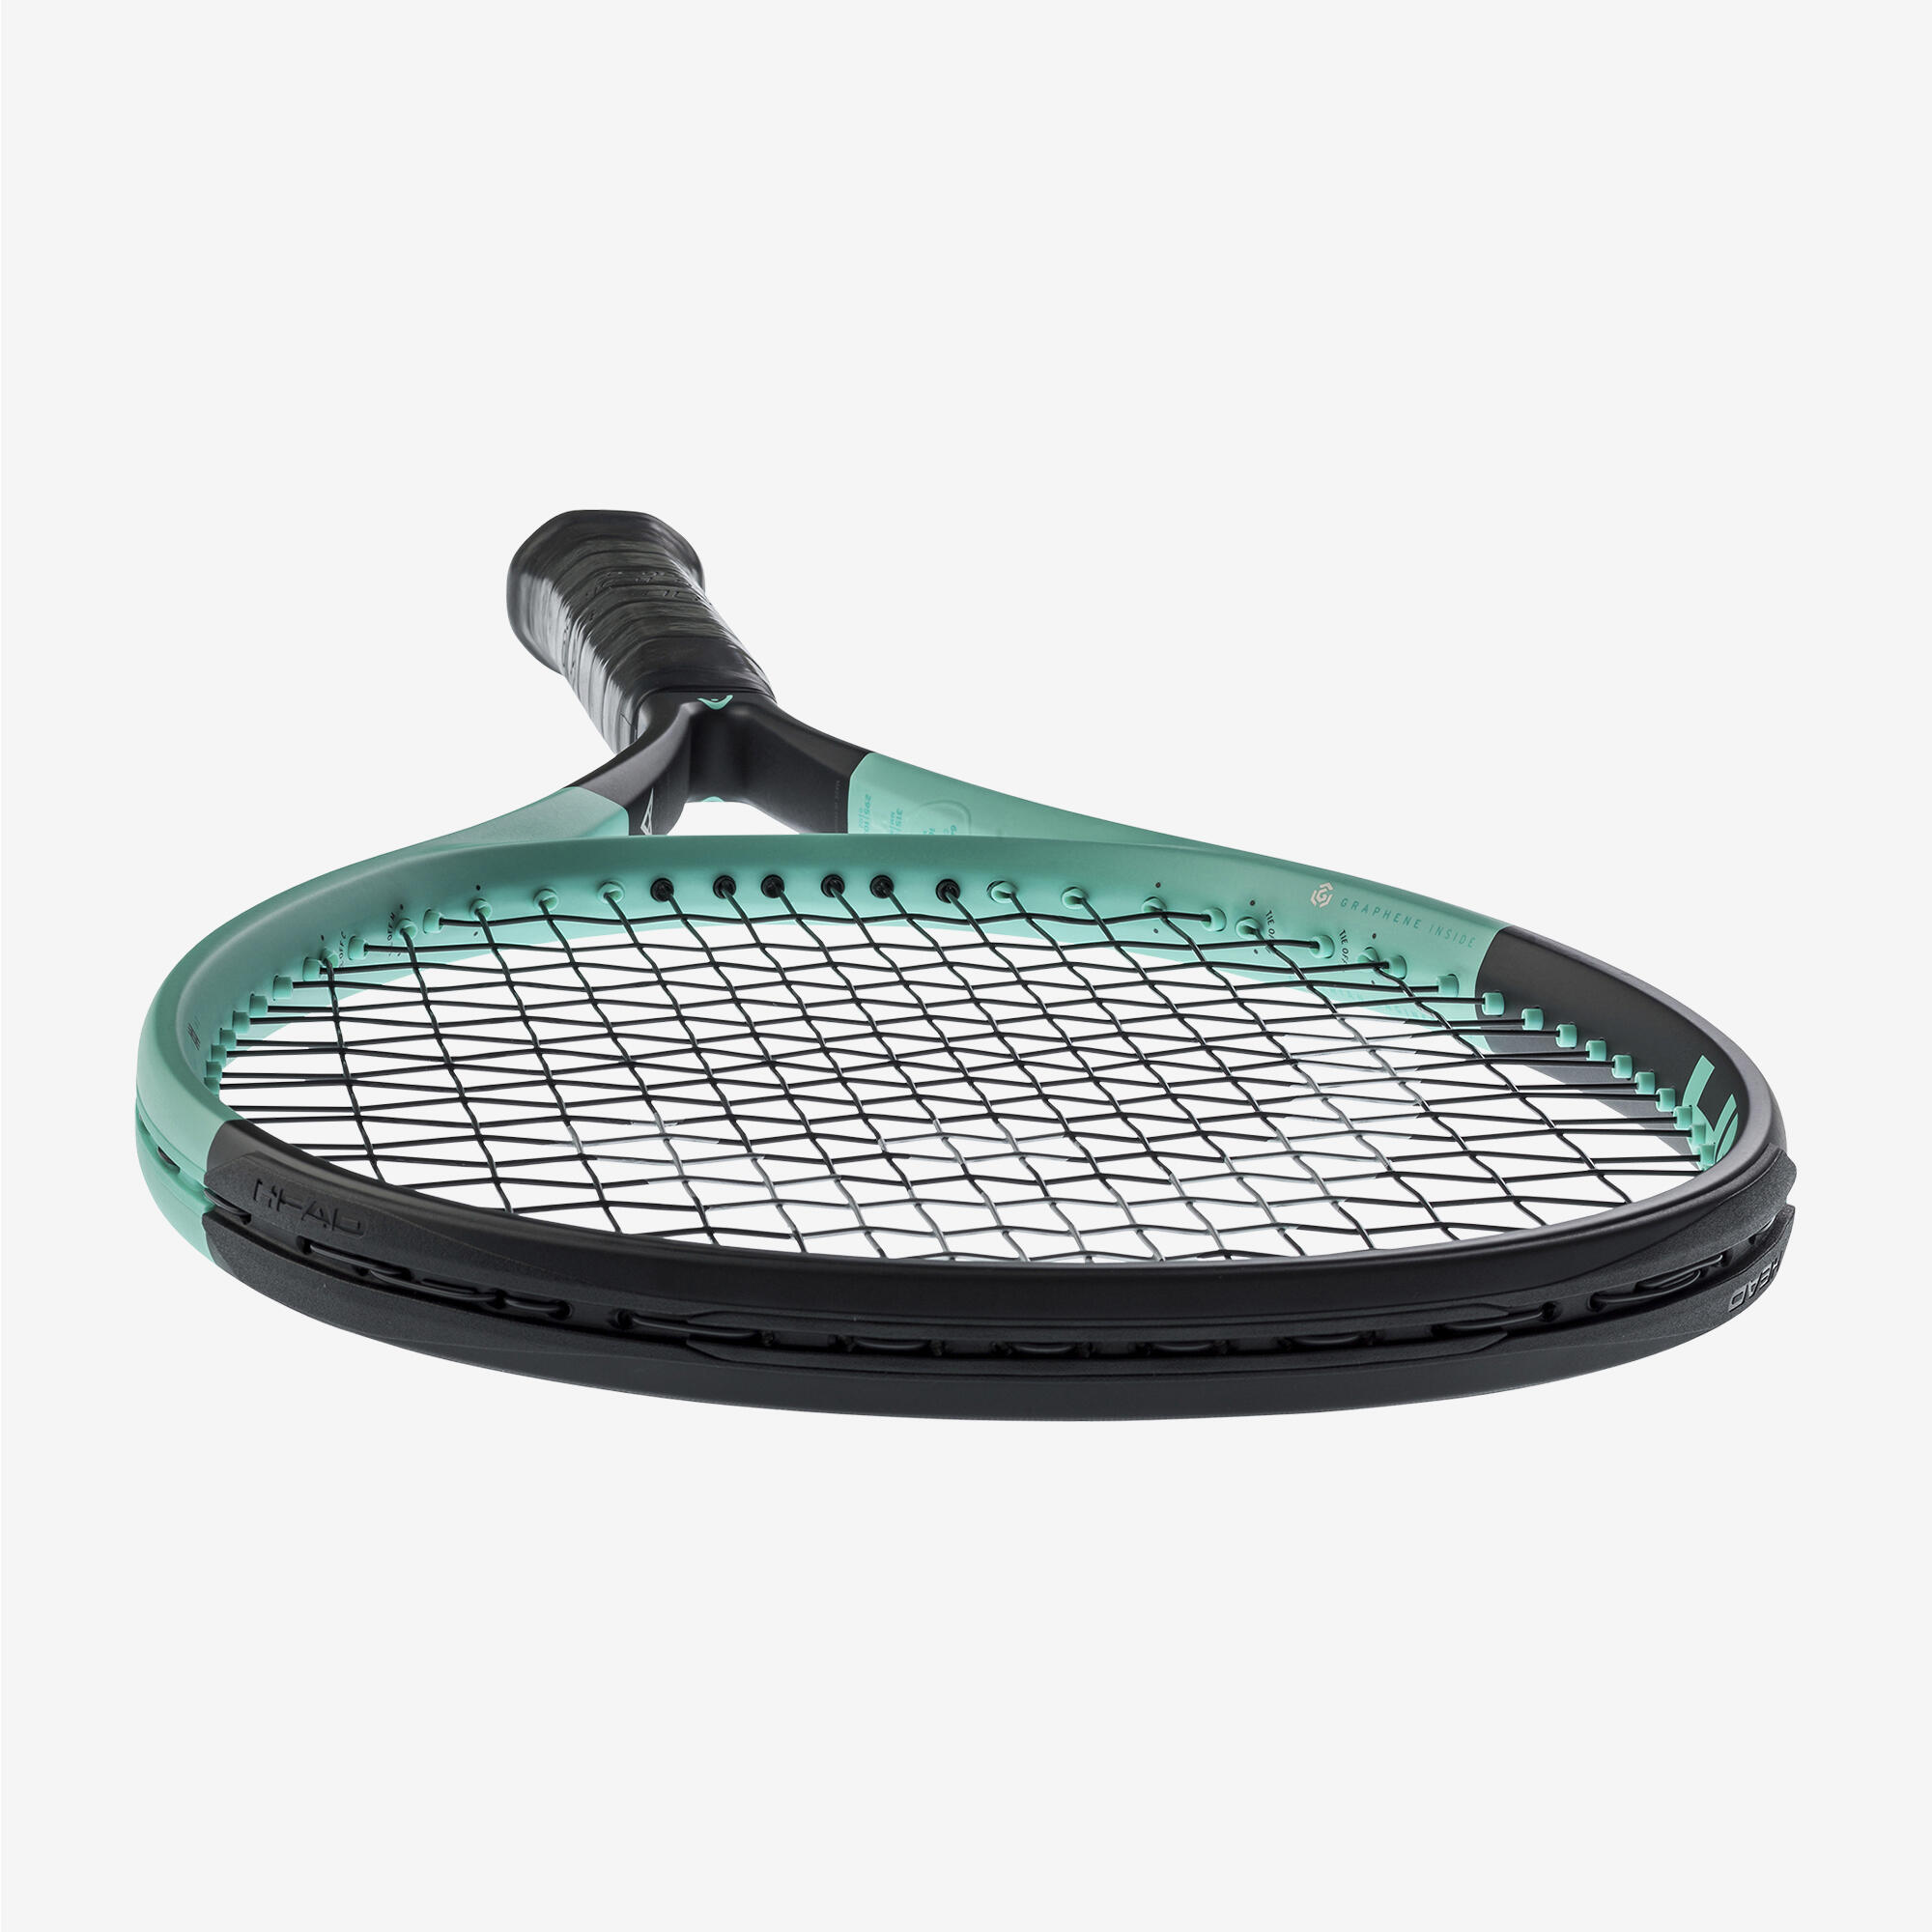 Adult Tennis Racket Auxetic Boom MP 2024 295g - Black/Green 5/7